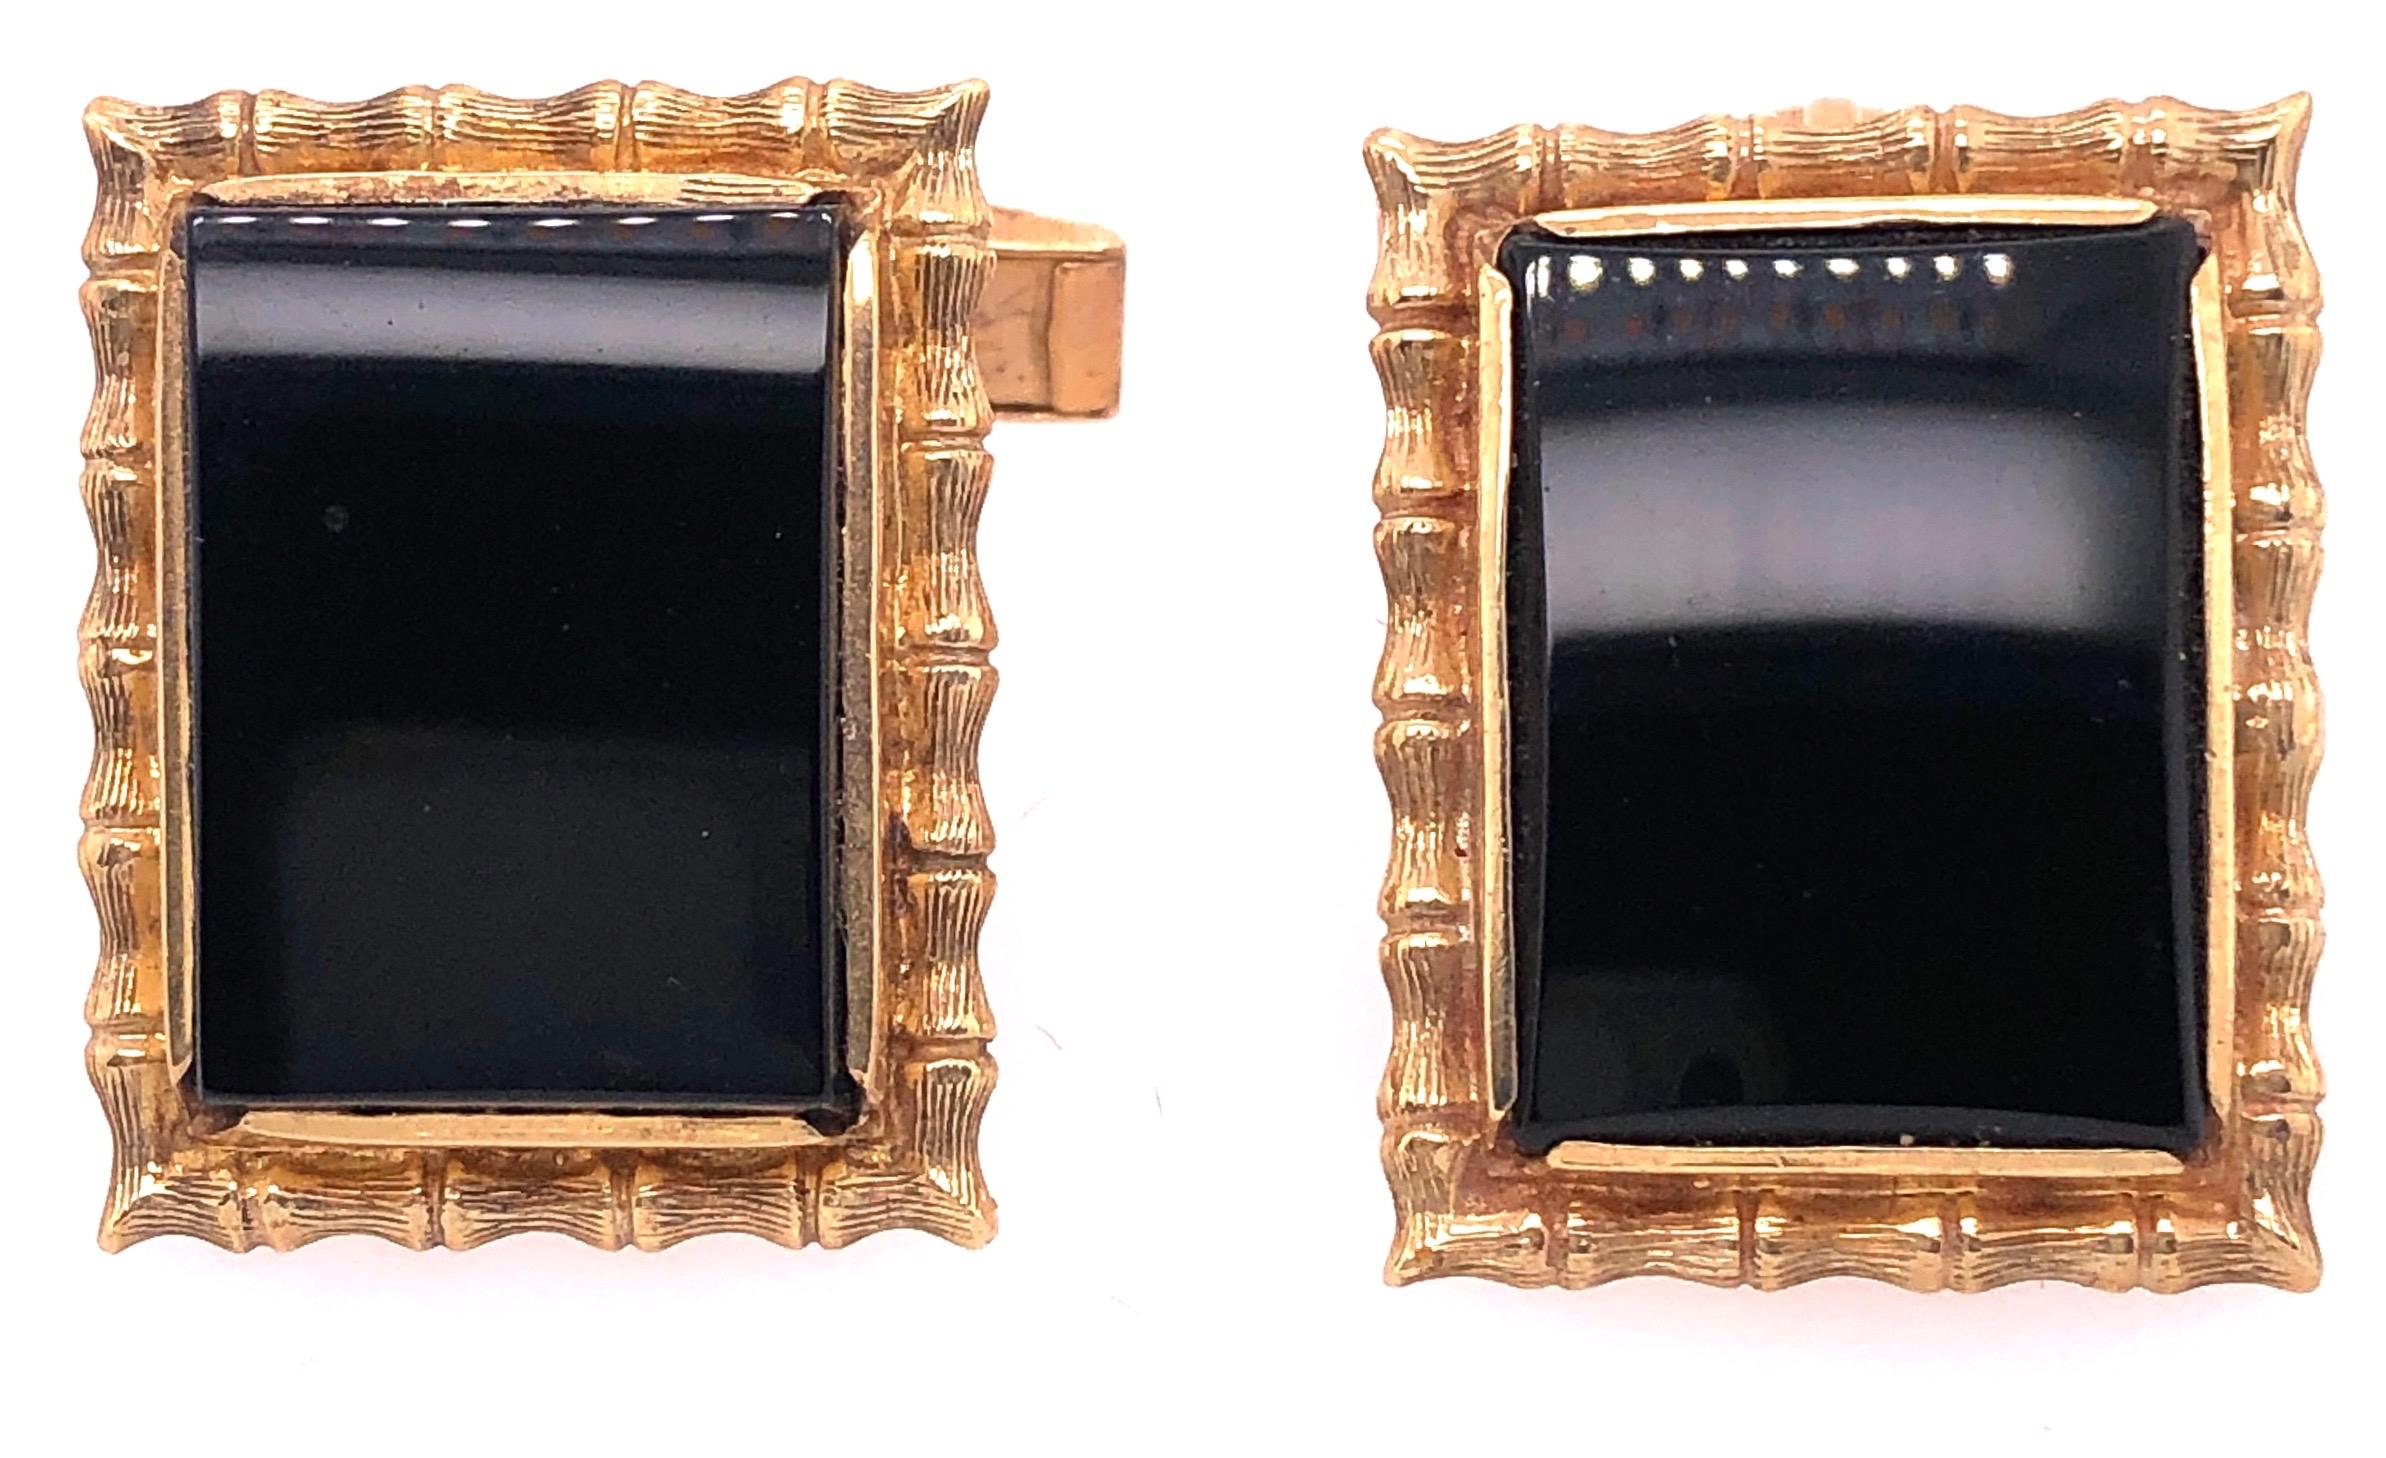 14 Karat Yellow Gold Contemporary Onyx Cuff links.
16.3 grams total weight
Height: 24 mm
Width: 18 mm
